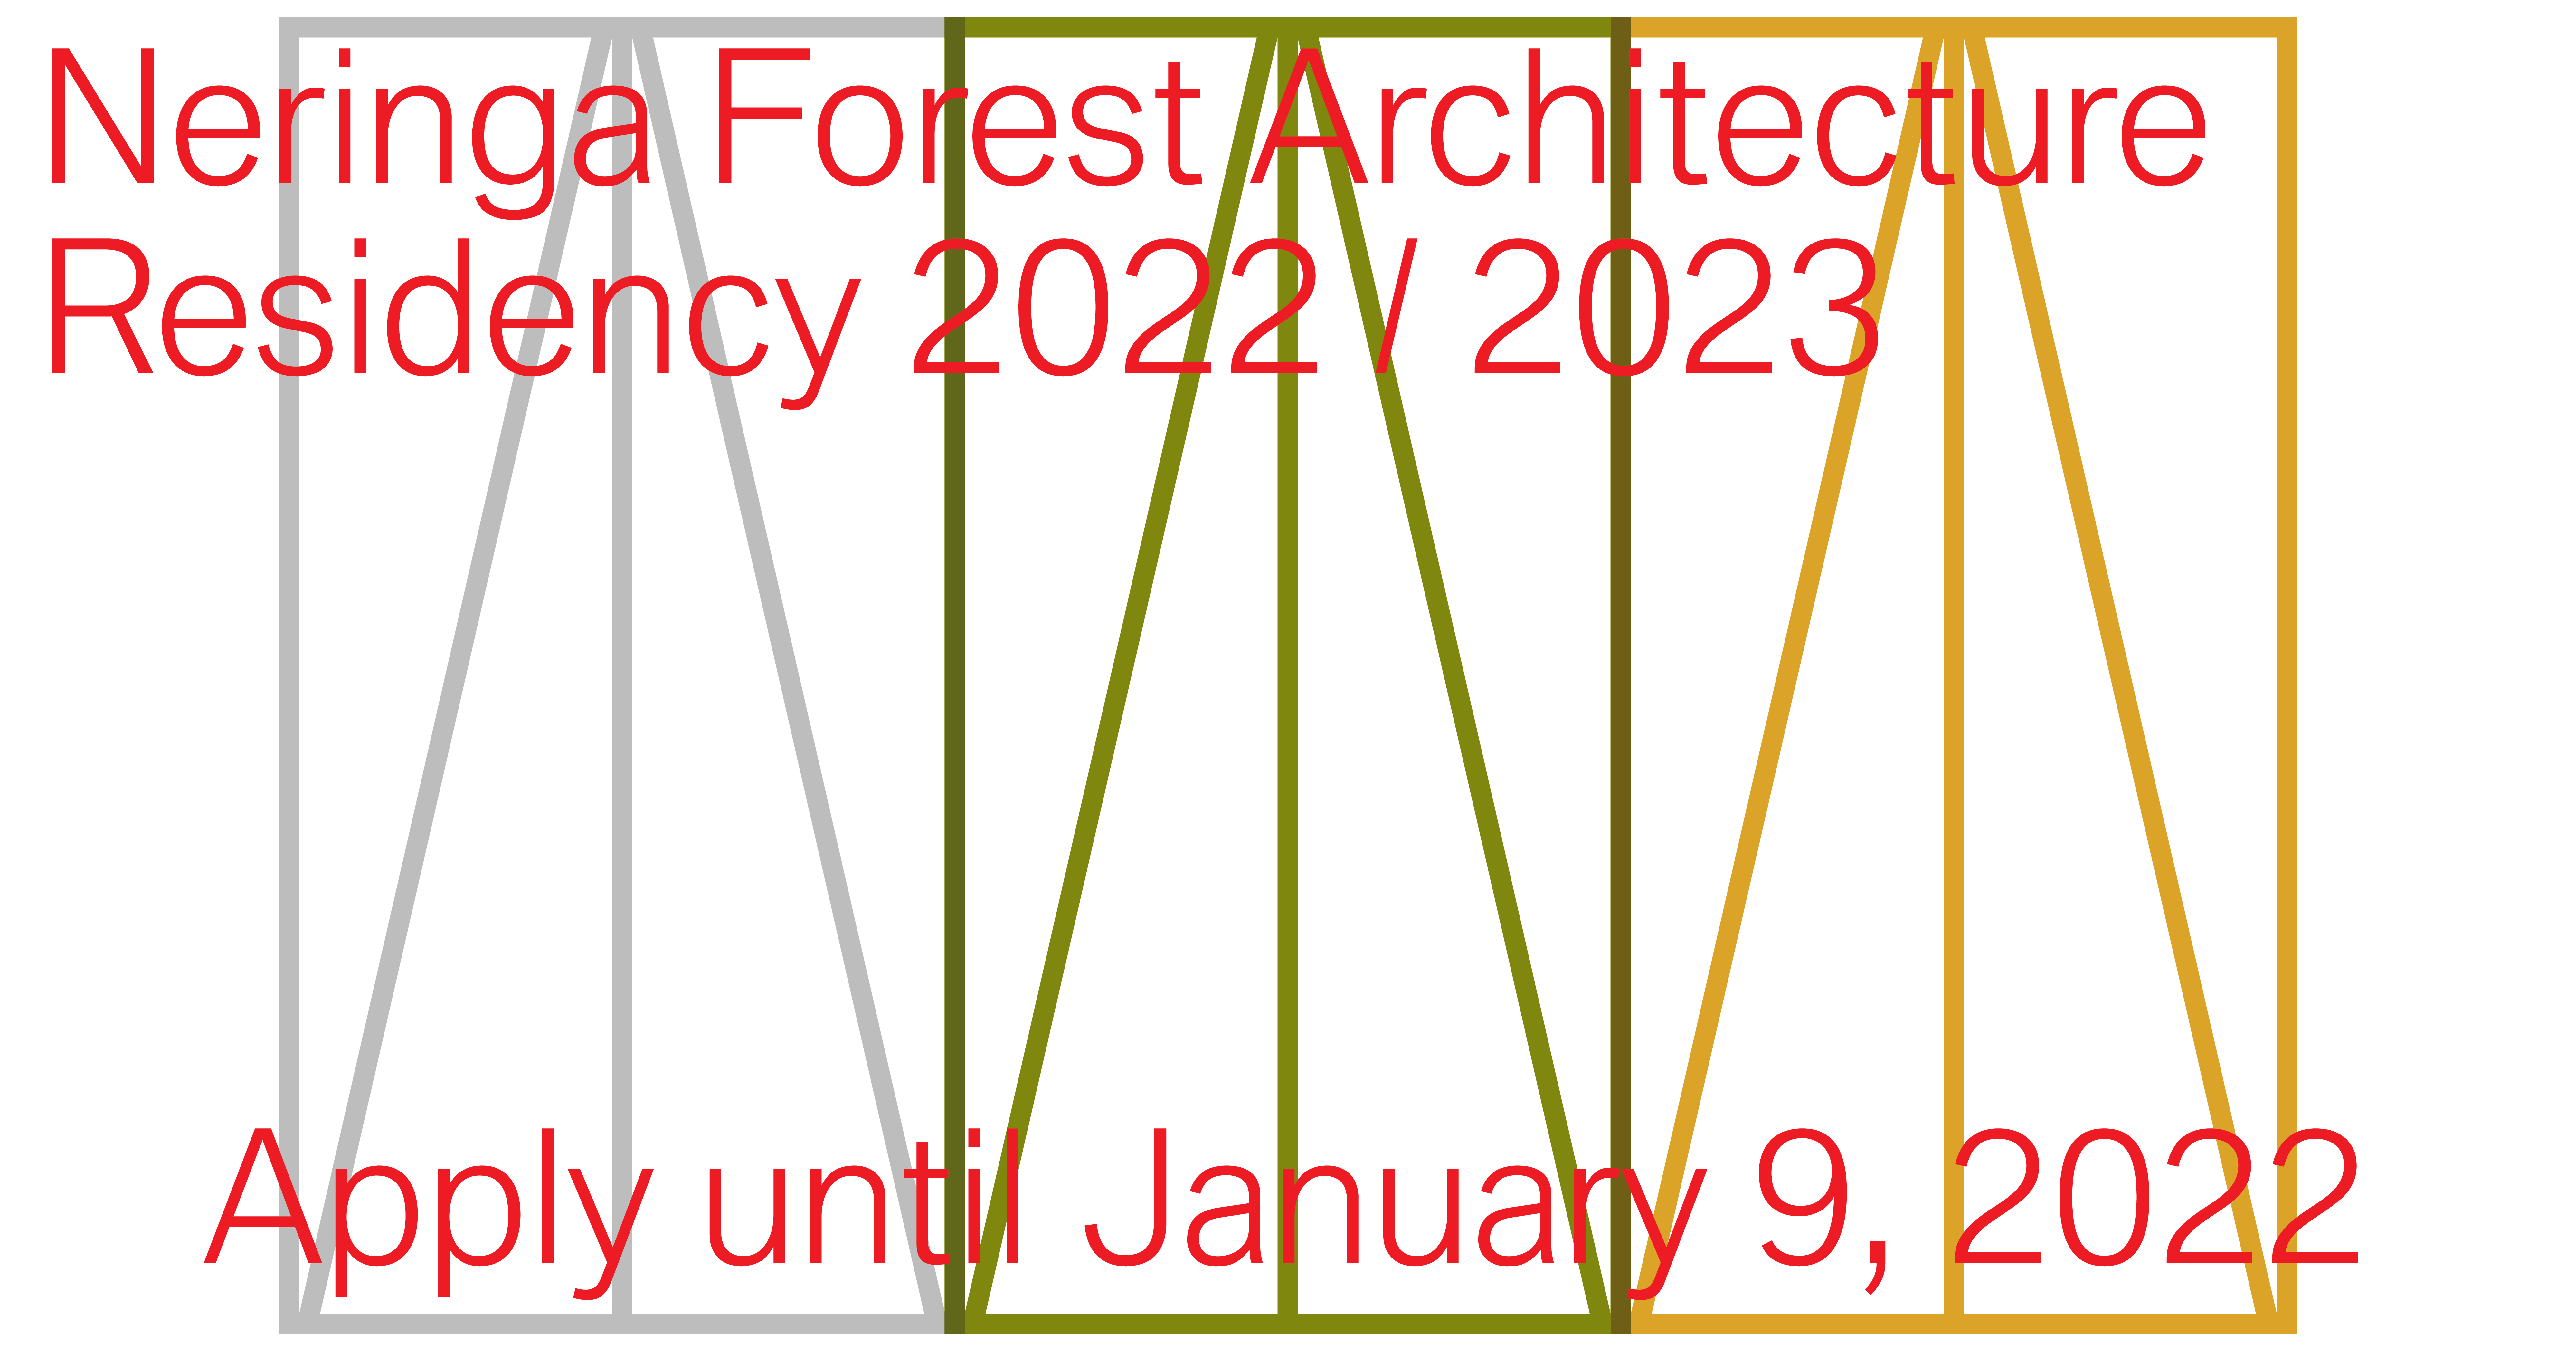 Open call: Neringa Forest Architecture Residency 2022/2023